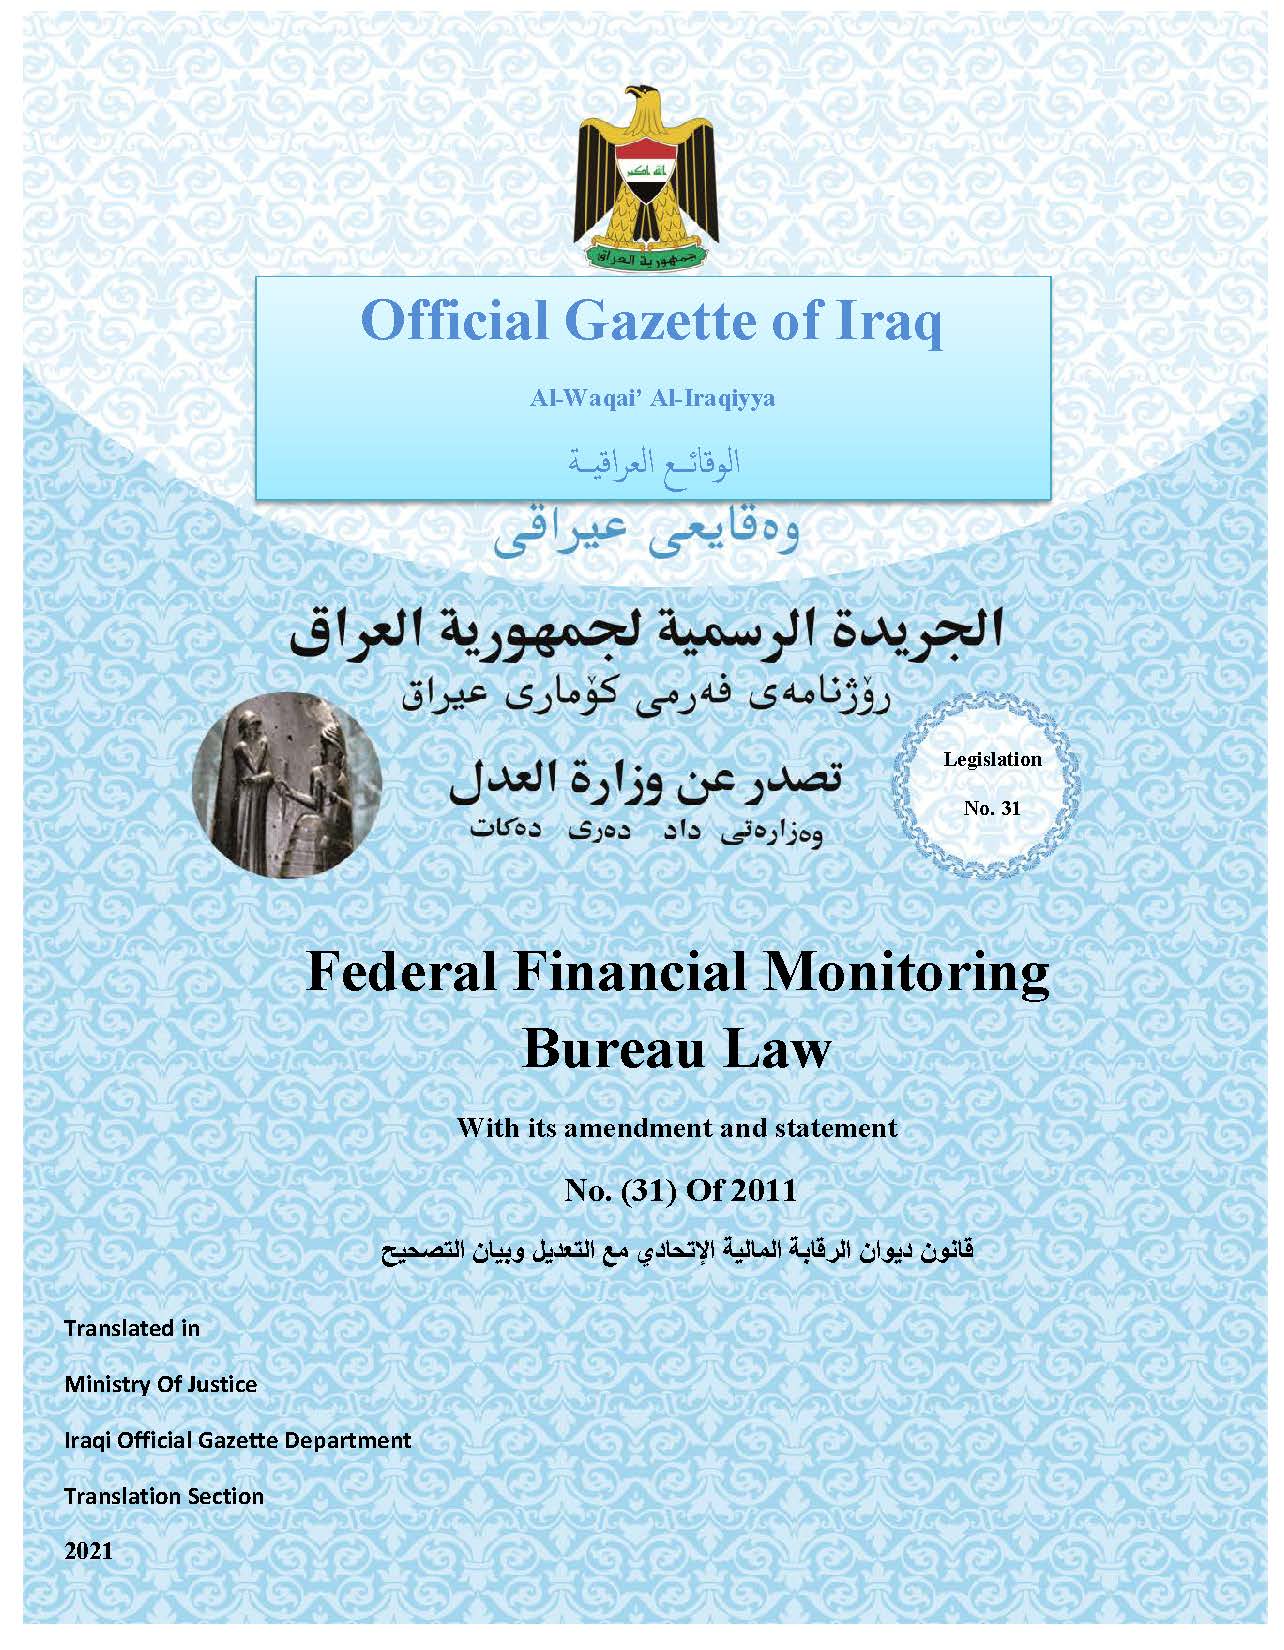 Federal Financial Monitoring Bureau Law With its amendment and statement No.(31) Of 2011